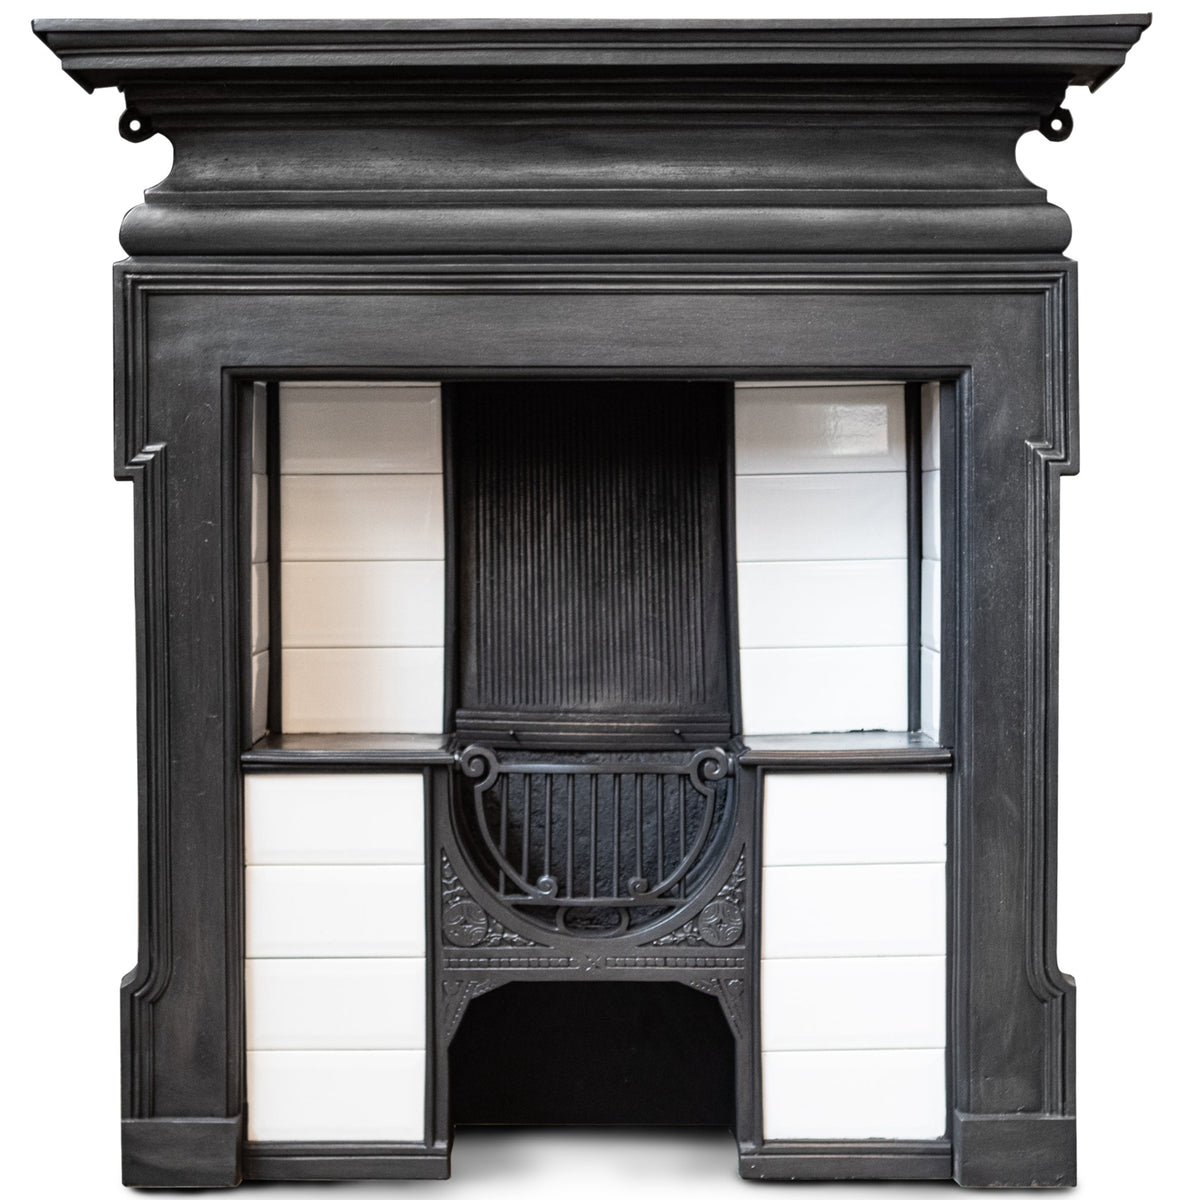 Antique Combination Fireplace with White Tiles | The Architectural Forum